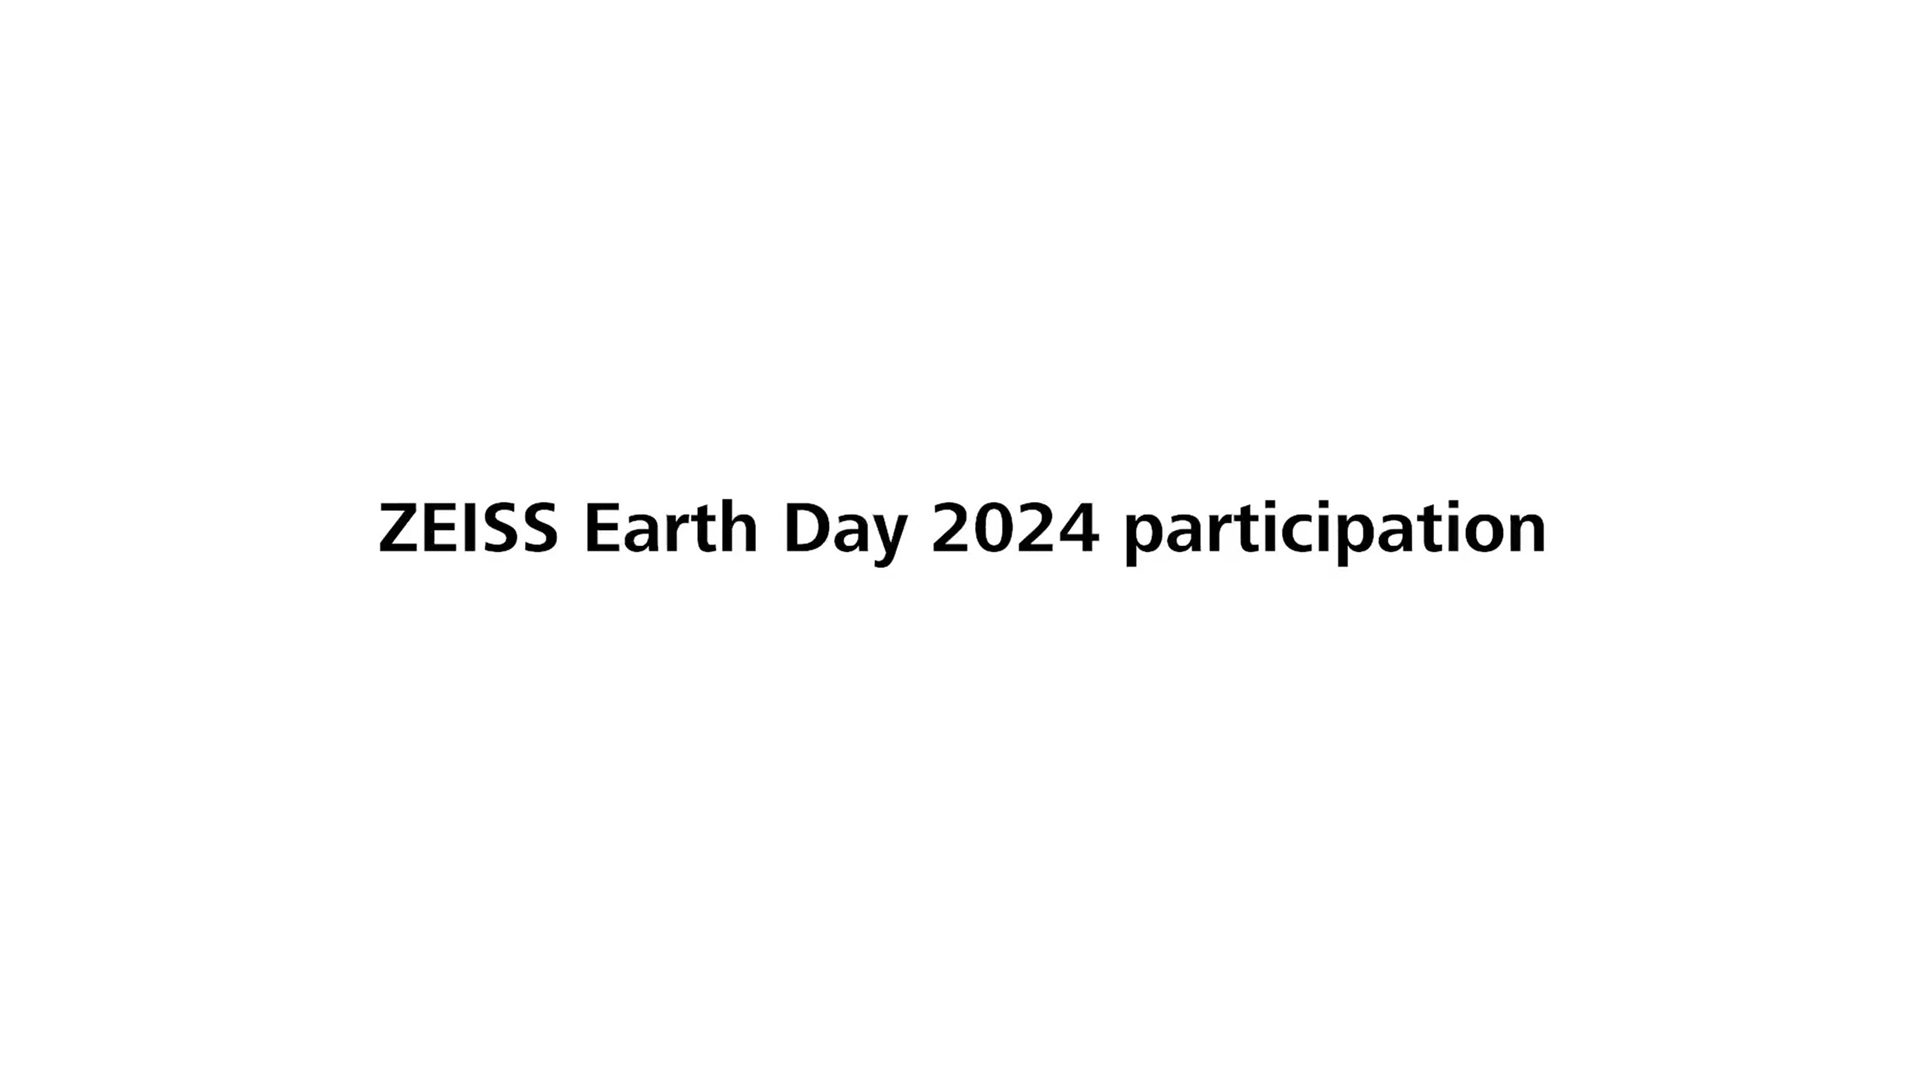 ZEISS Earth Day 2024